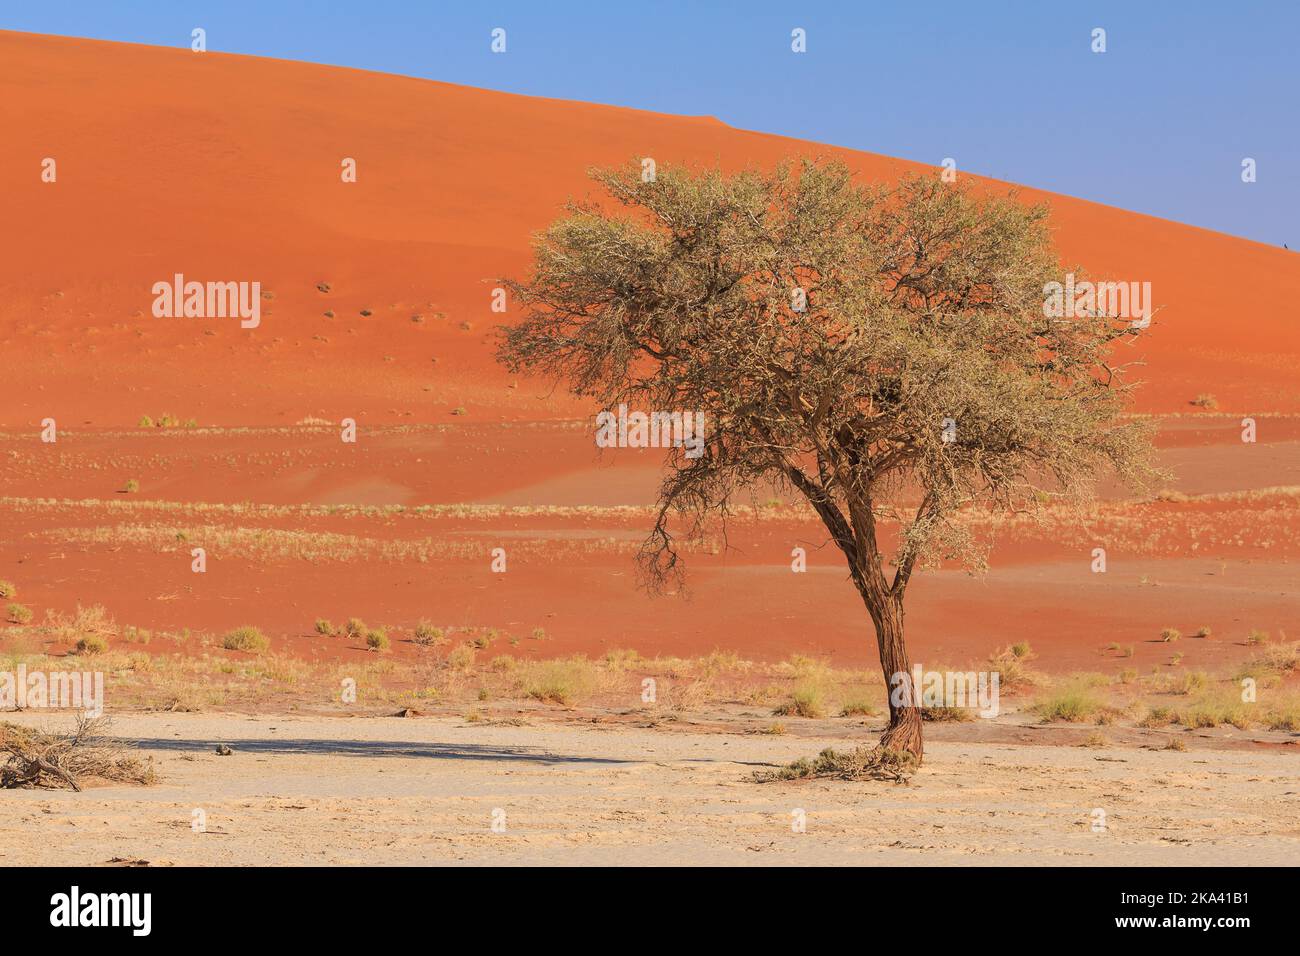 Deadvlei, white clay pan located inside the Namib-Naukluft Park in Namibia. Live, green acacia trees. Colorful dunes in the background. Stock Photo